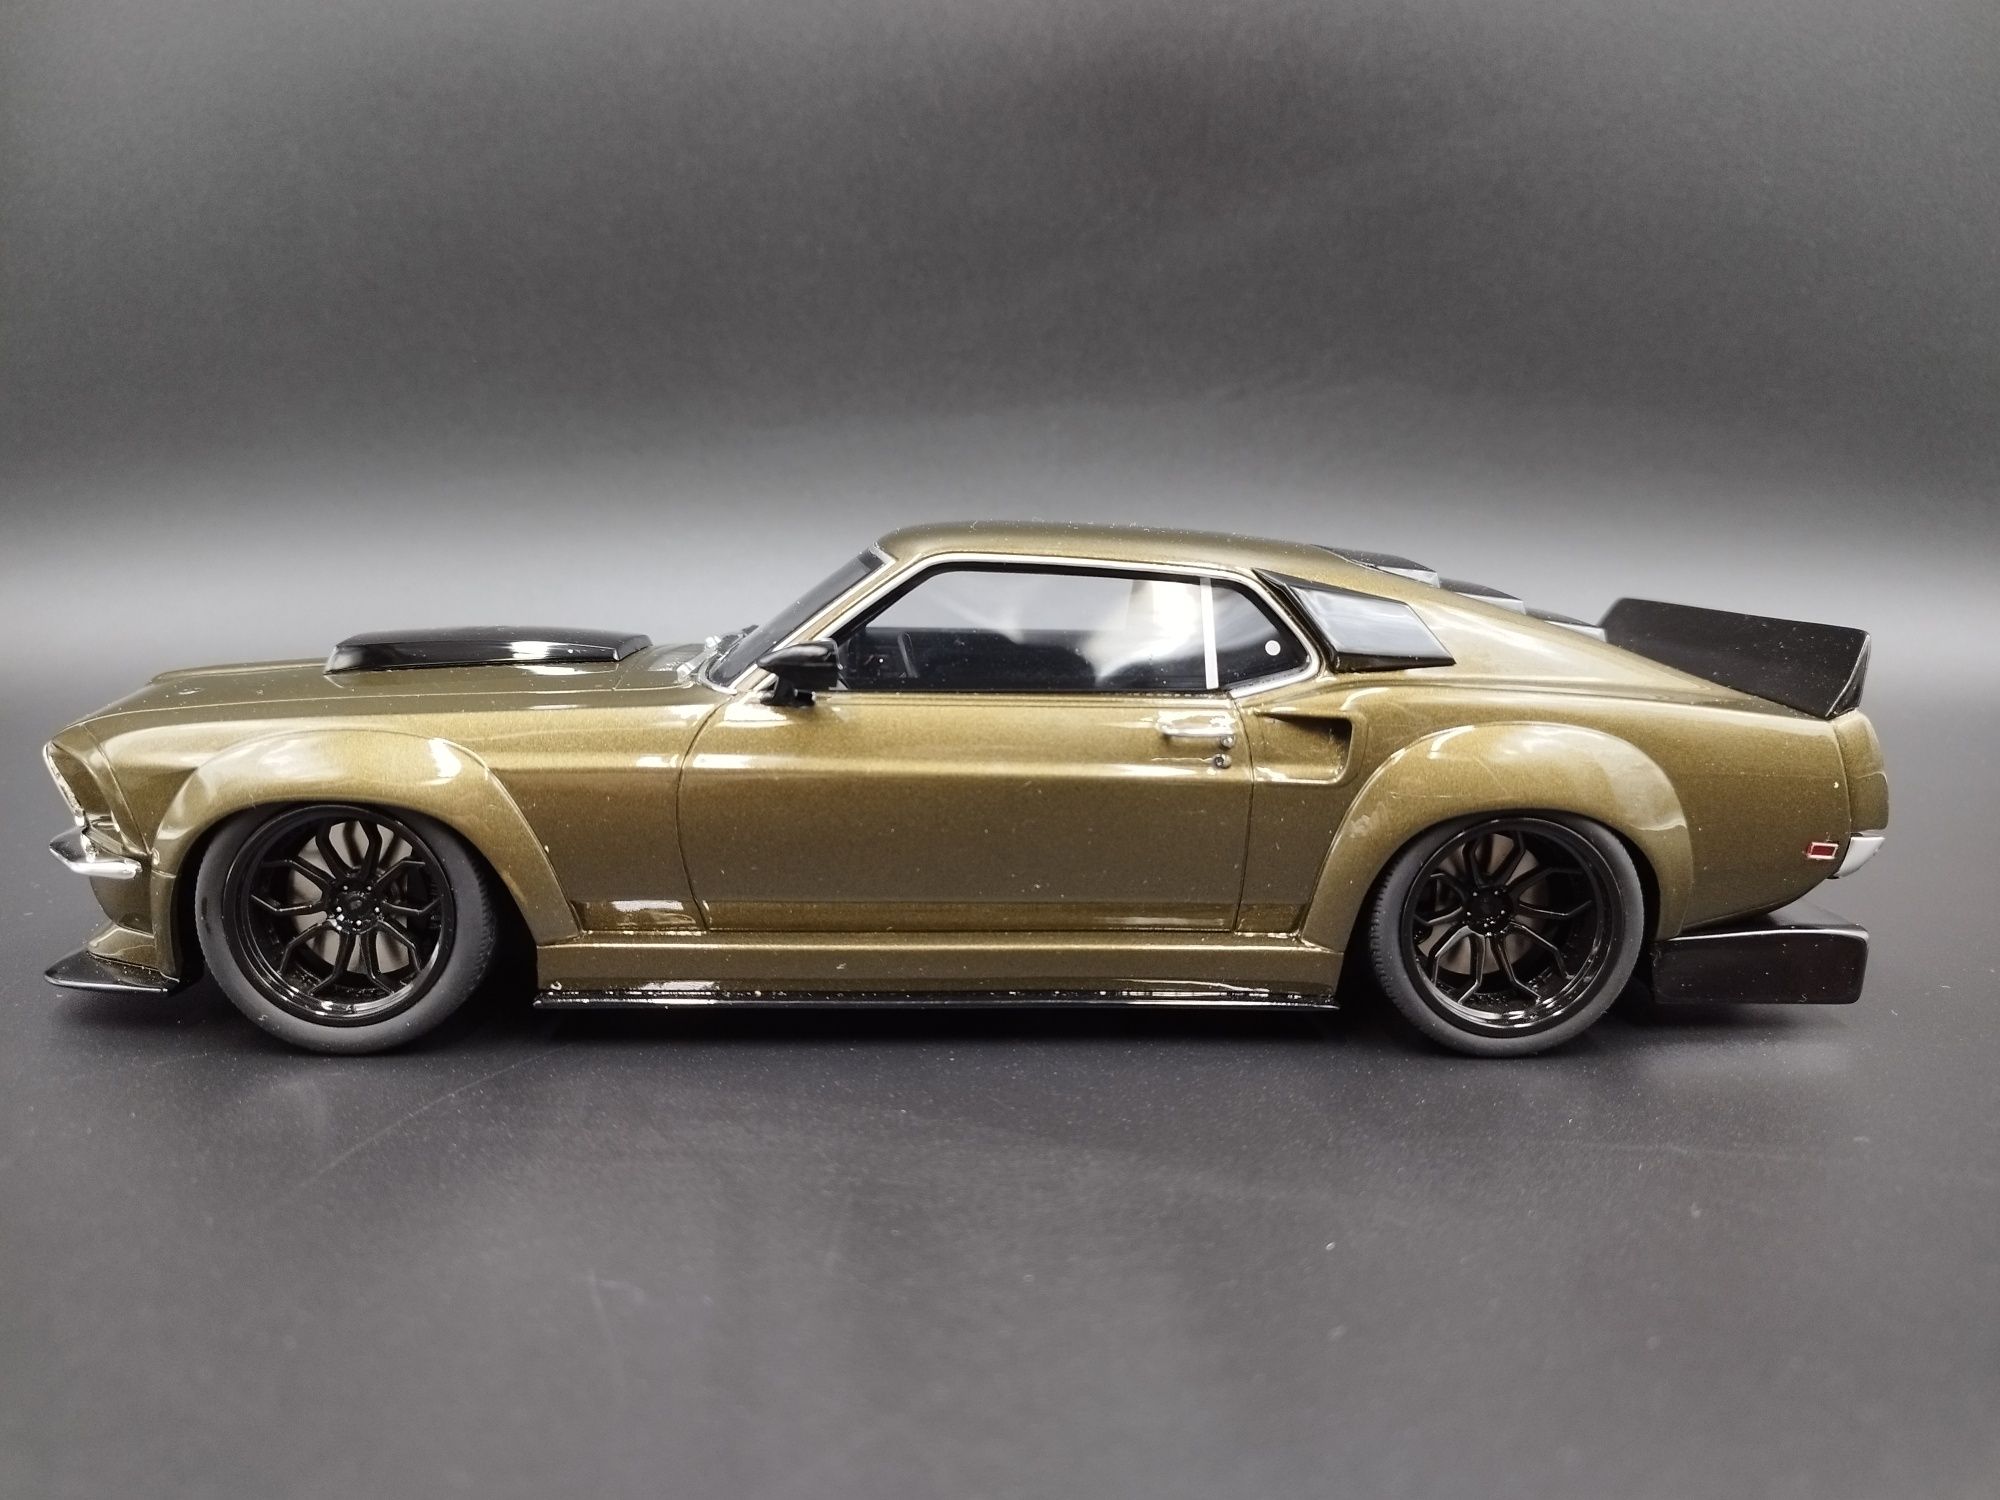 1:18 GT Spirit 1969 Ford Mustang USA Coupe model